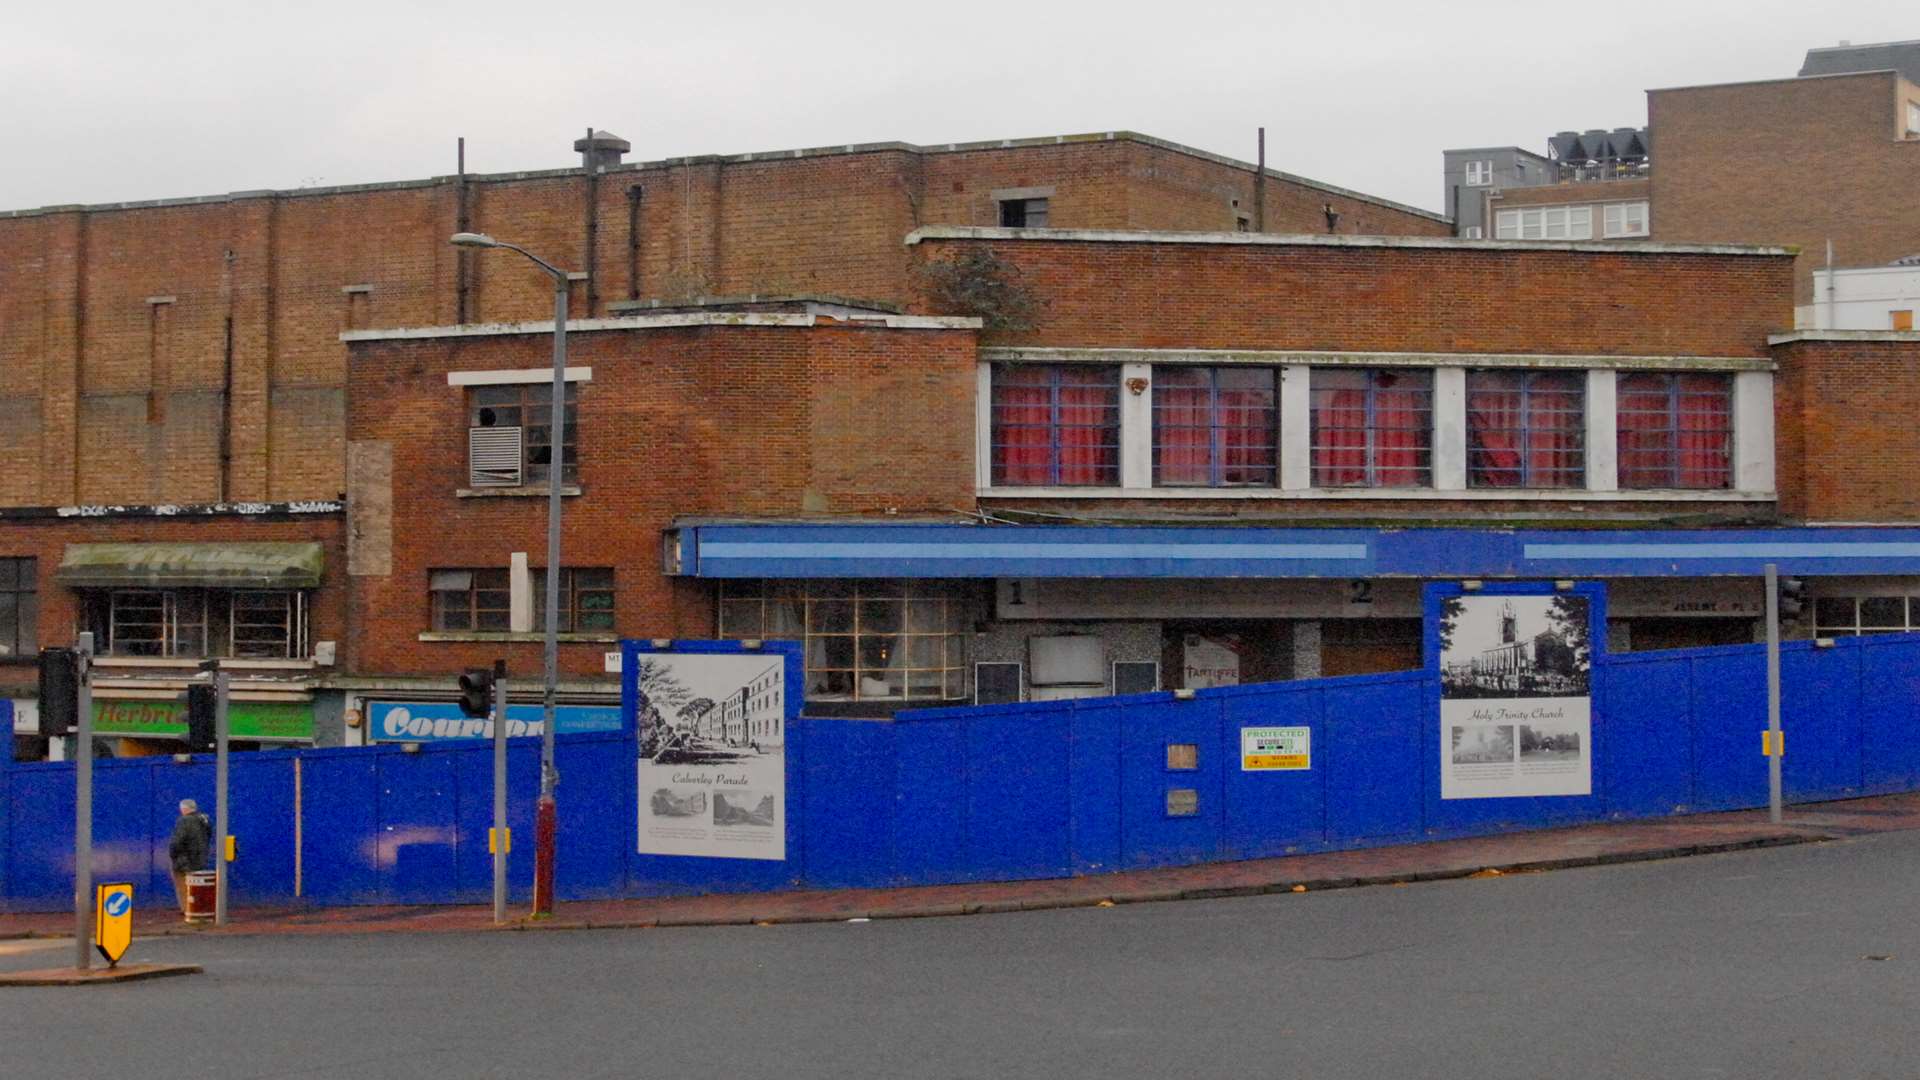 The former ABC Cinema became a 'grot spot' of the town before the building was demolished